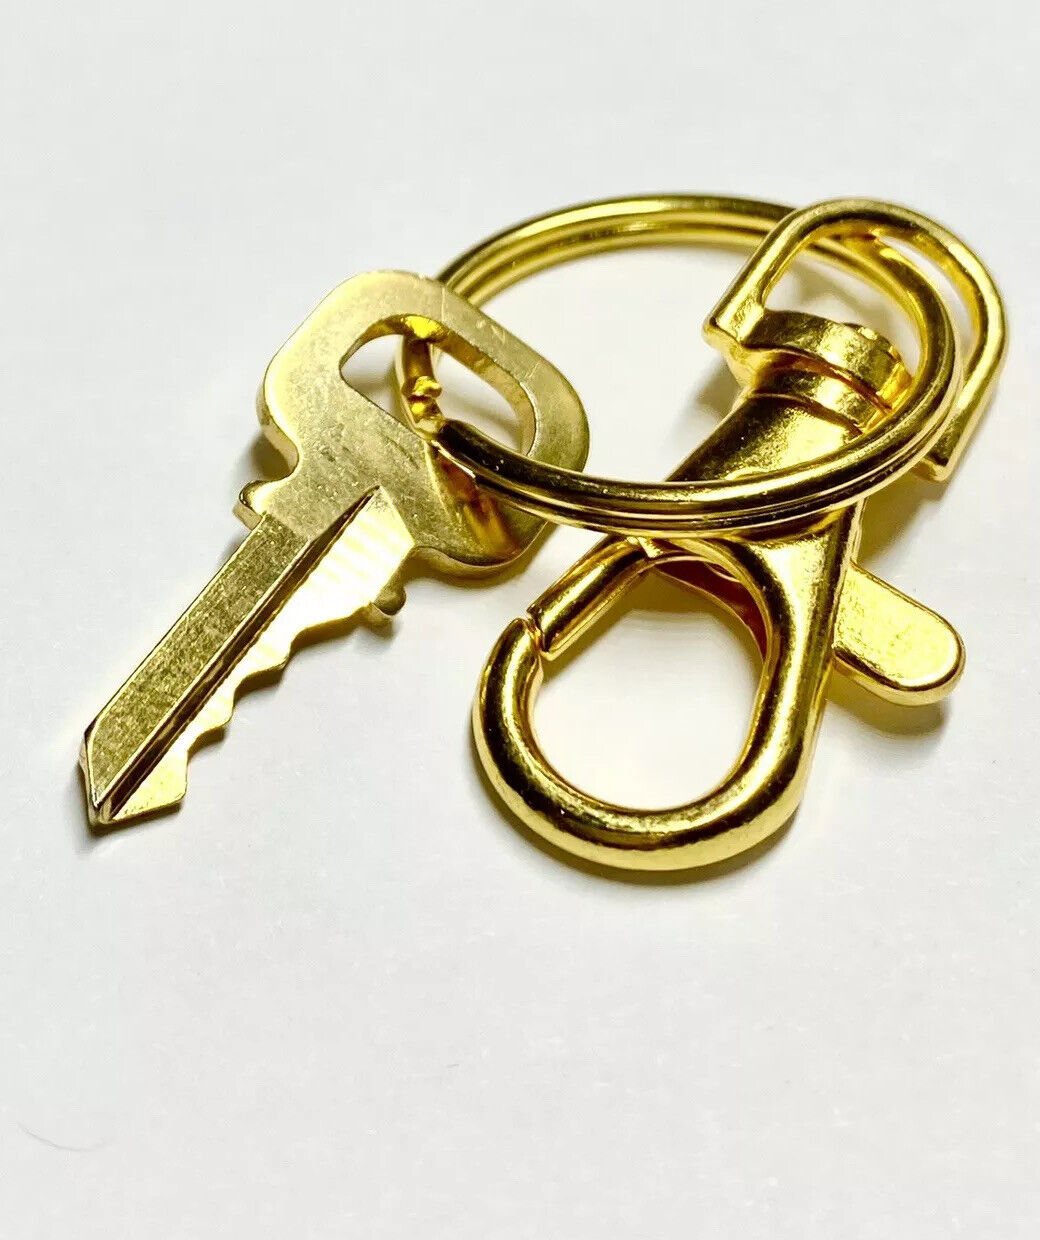 Louis Vuitton Key # 314 Brass Golden w/ Swivel Ring-fits Authentic Lock only!